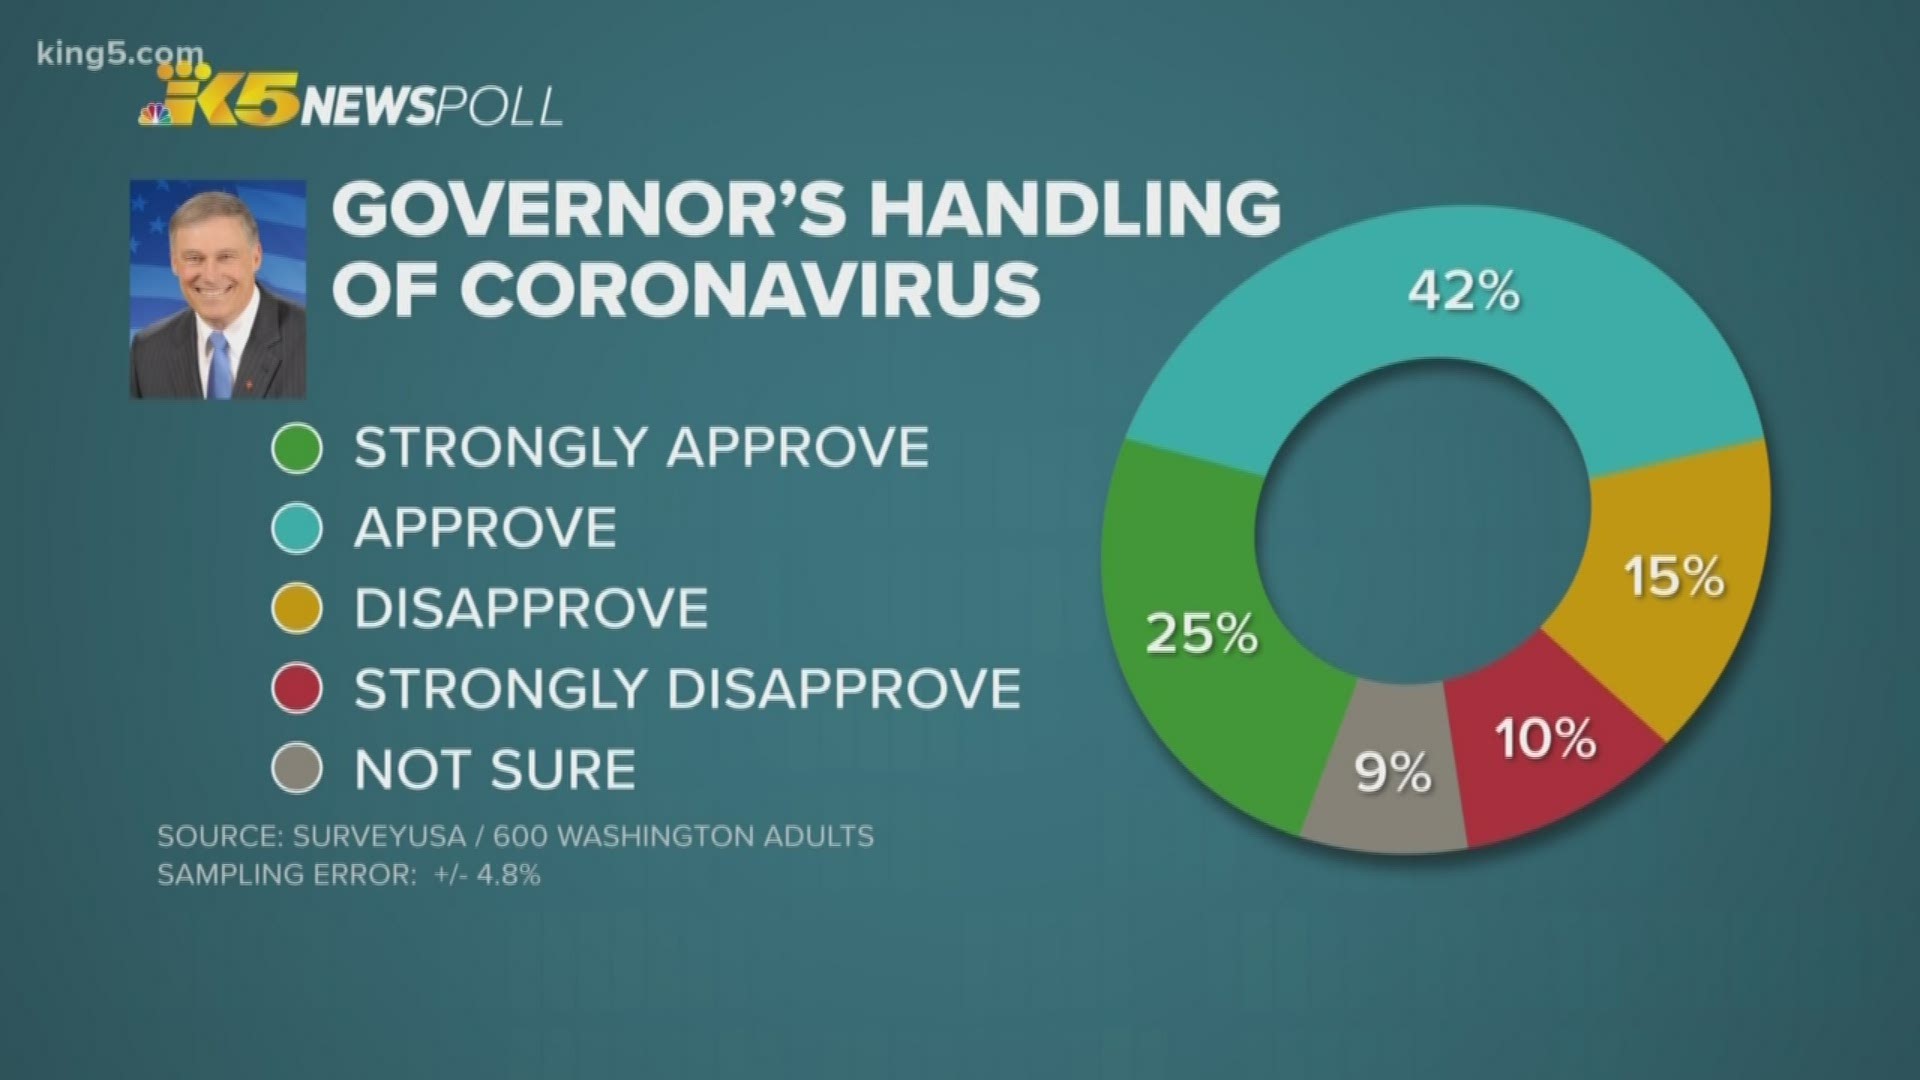 More than three-quarters of Washingtonians surveyed approve of Gov. Jay Inslee’s response to the coronavirus pandemic, according to an exclusive KING 5 News poll.